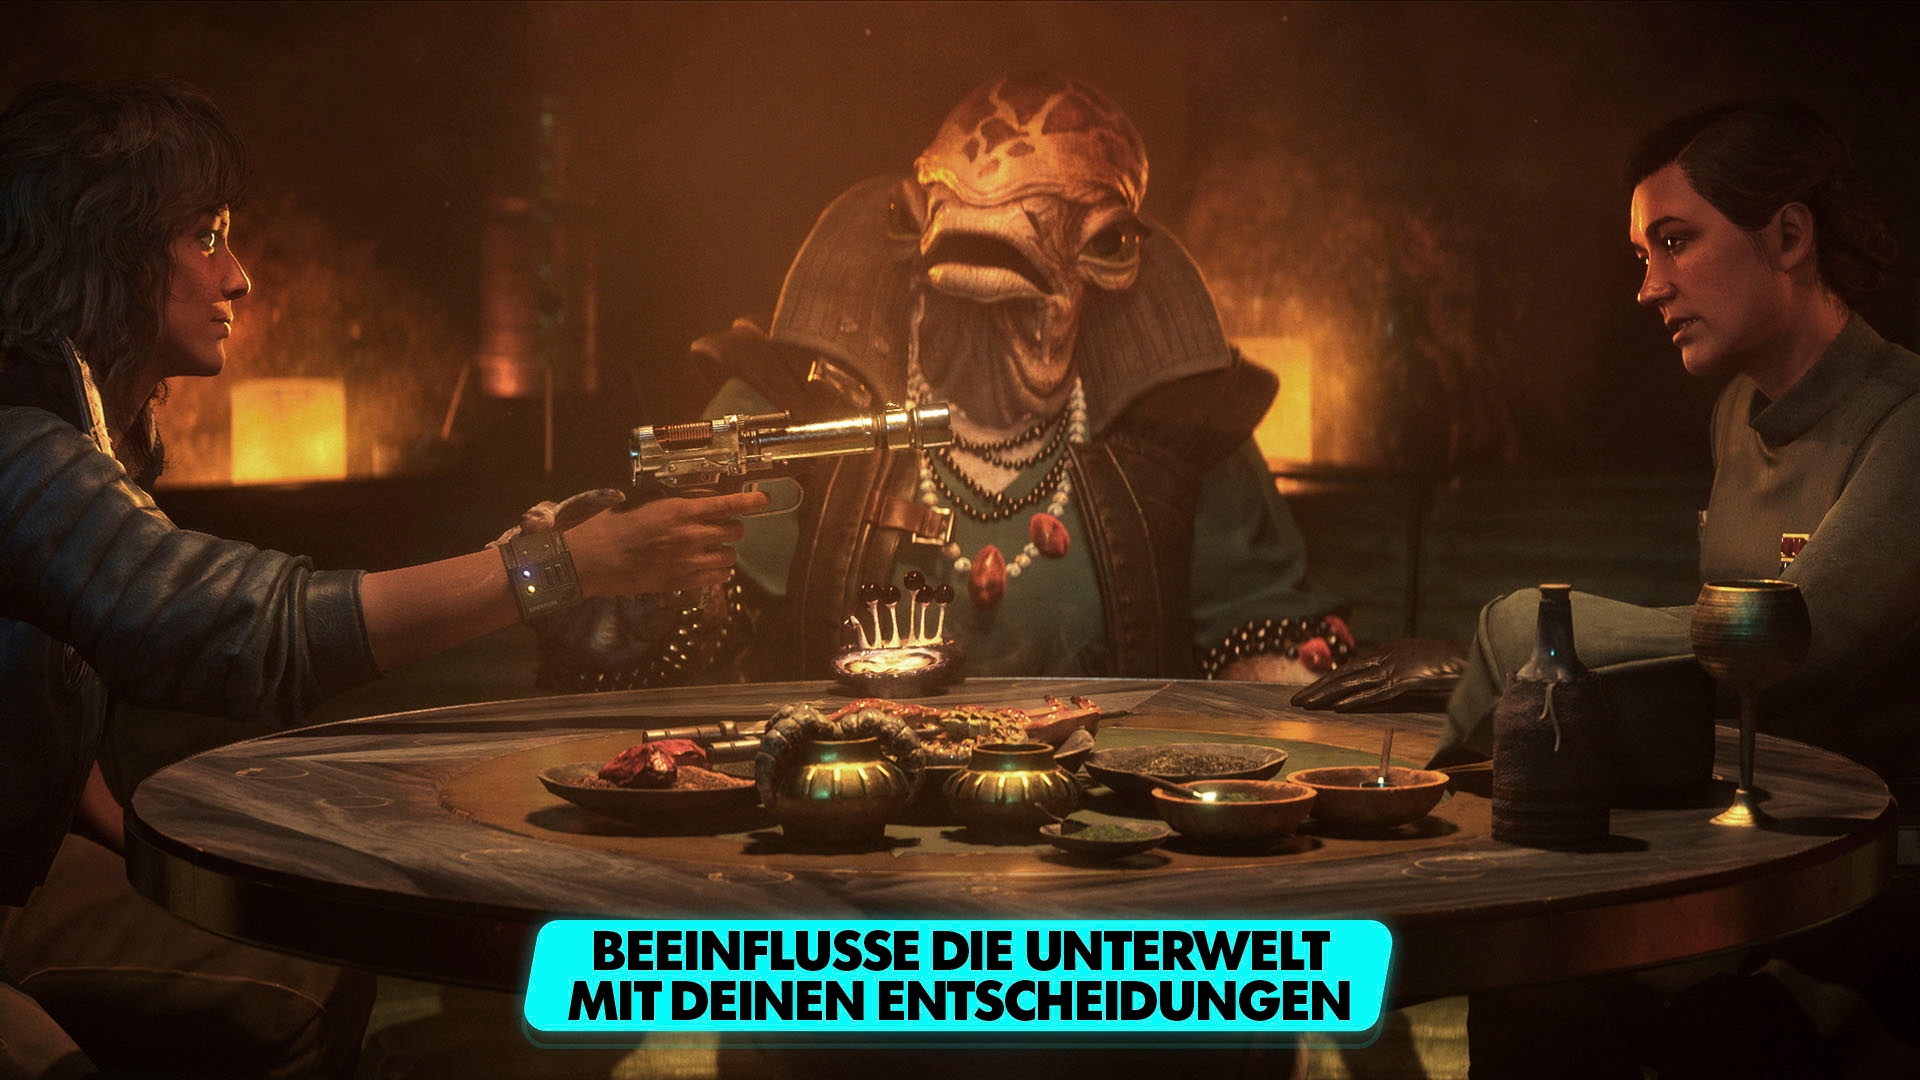 UBISOFT Spielesoftware »Star Wars Outlaws Gold Edition«, Xbox Series X